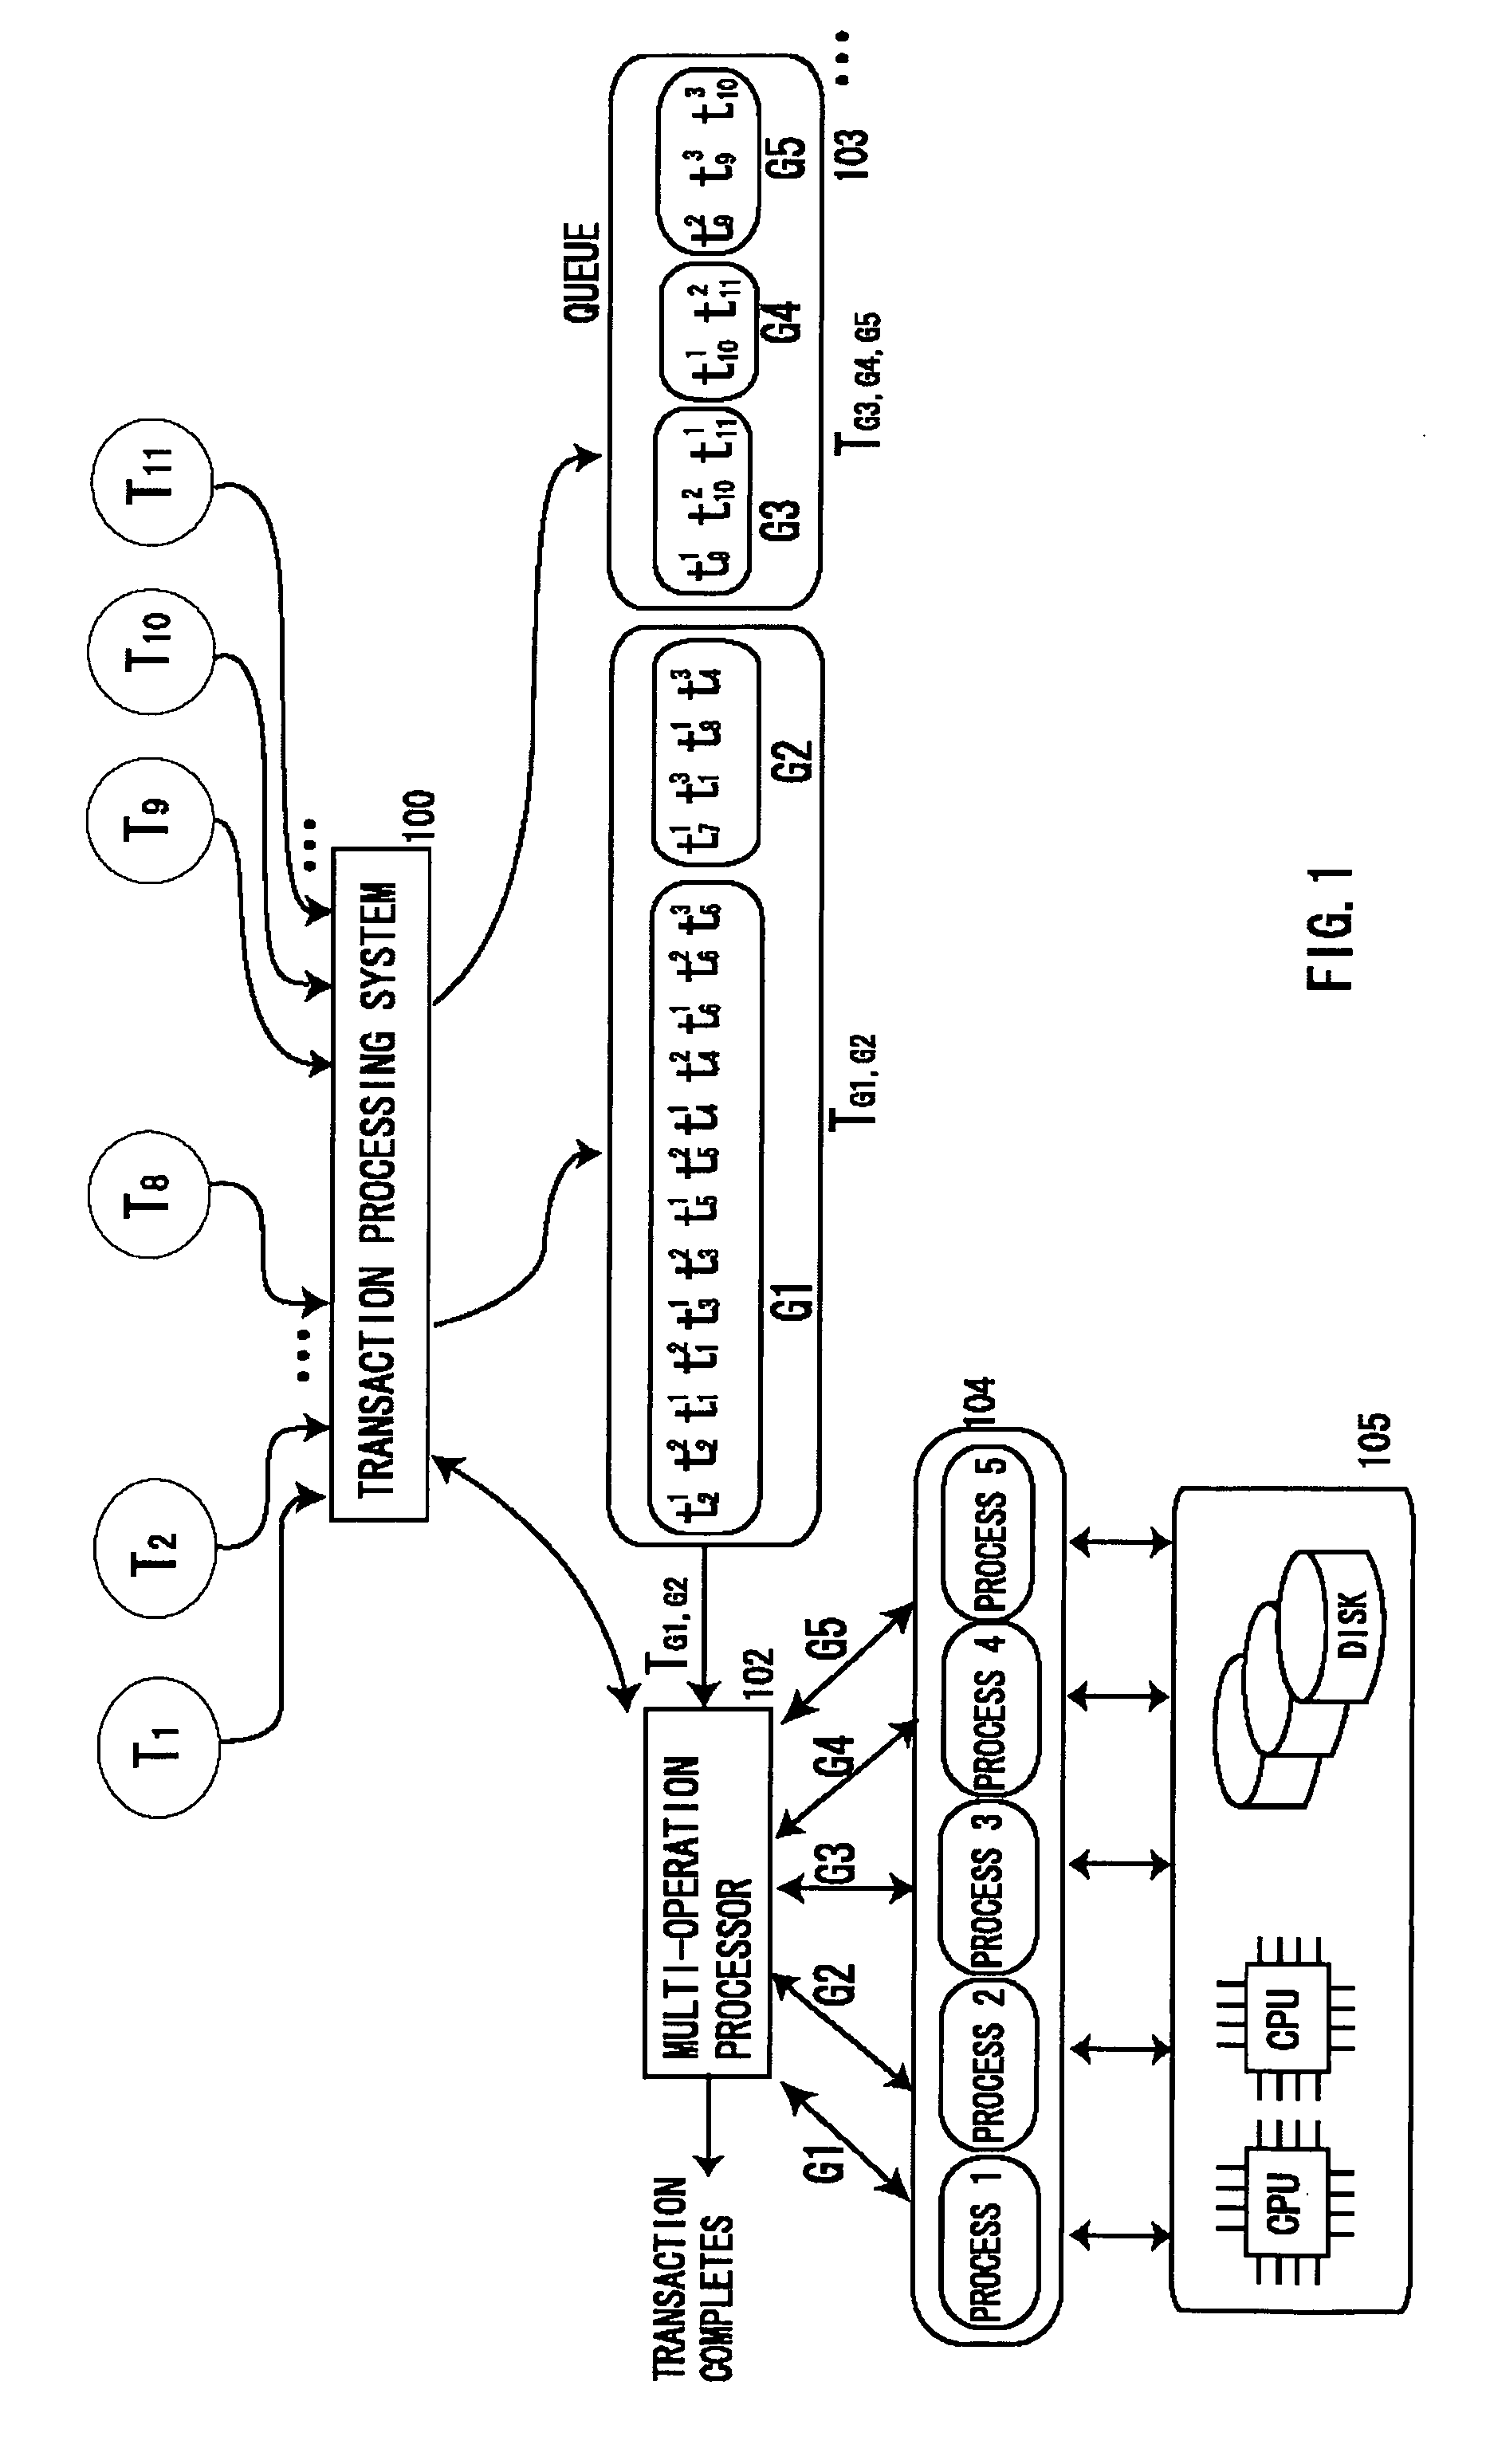 Transaction processing system of database using multi-operation processing providing concurrency control of transactions